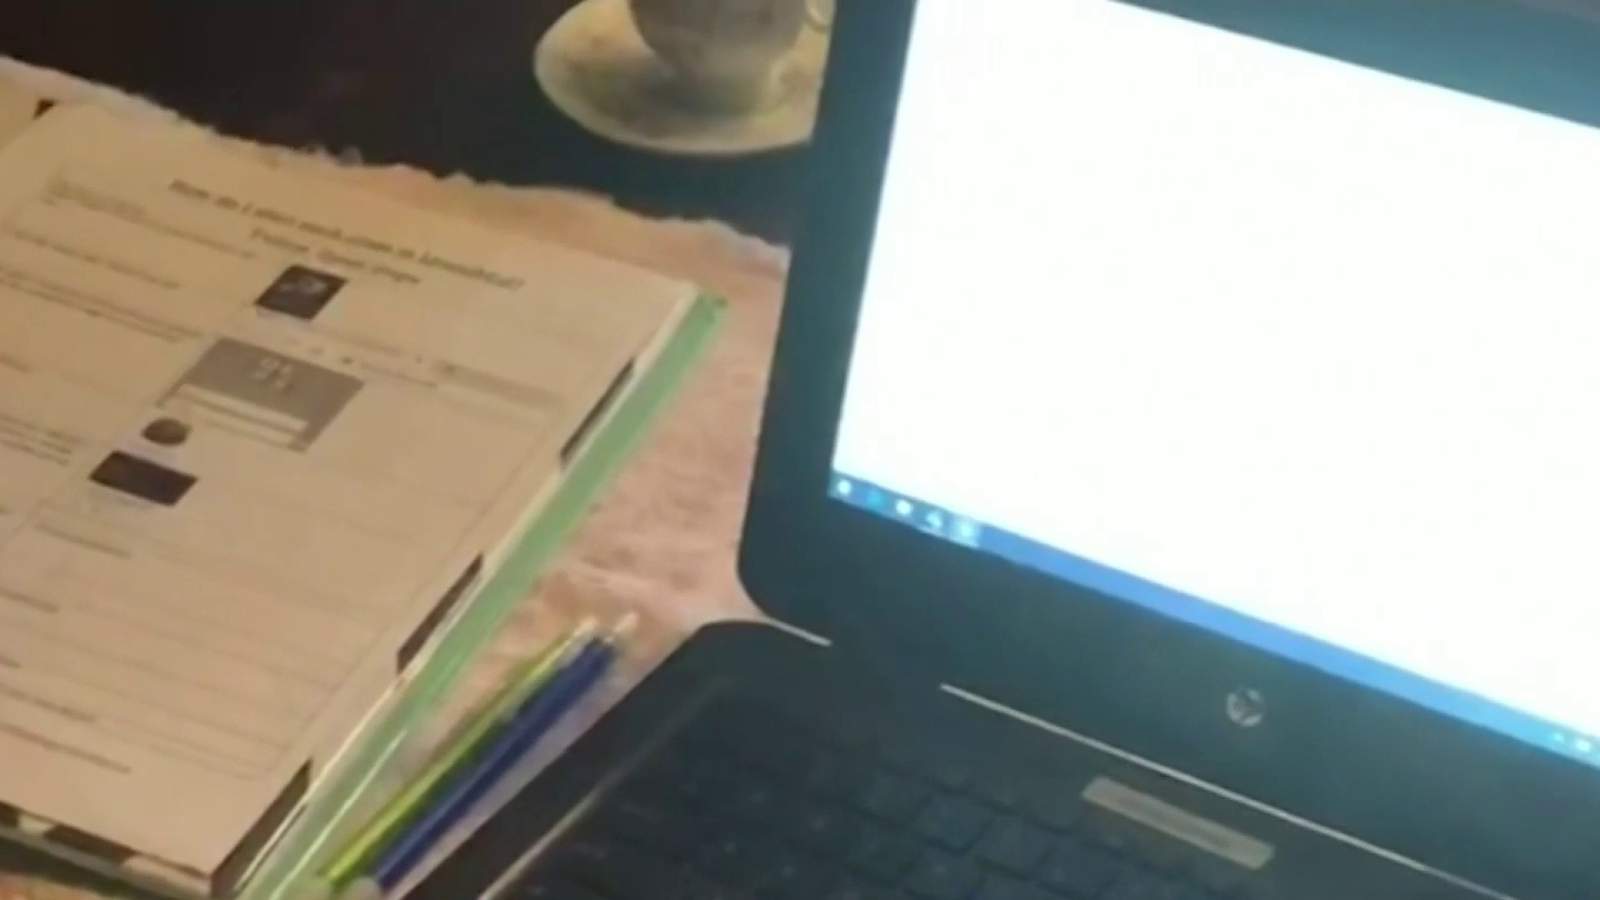 Orange County student waiting weeks for laptop needed for virtual classes, parent says